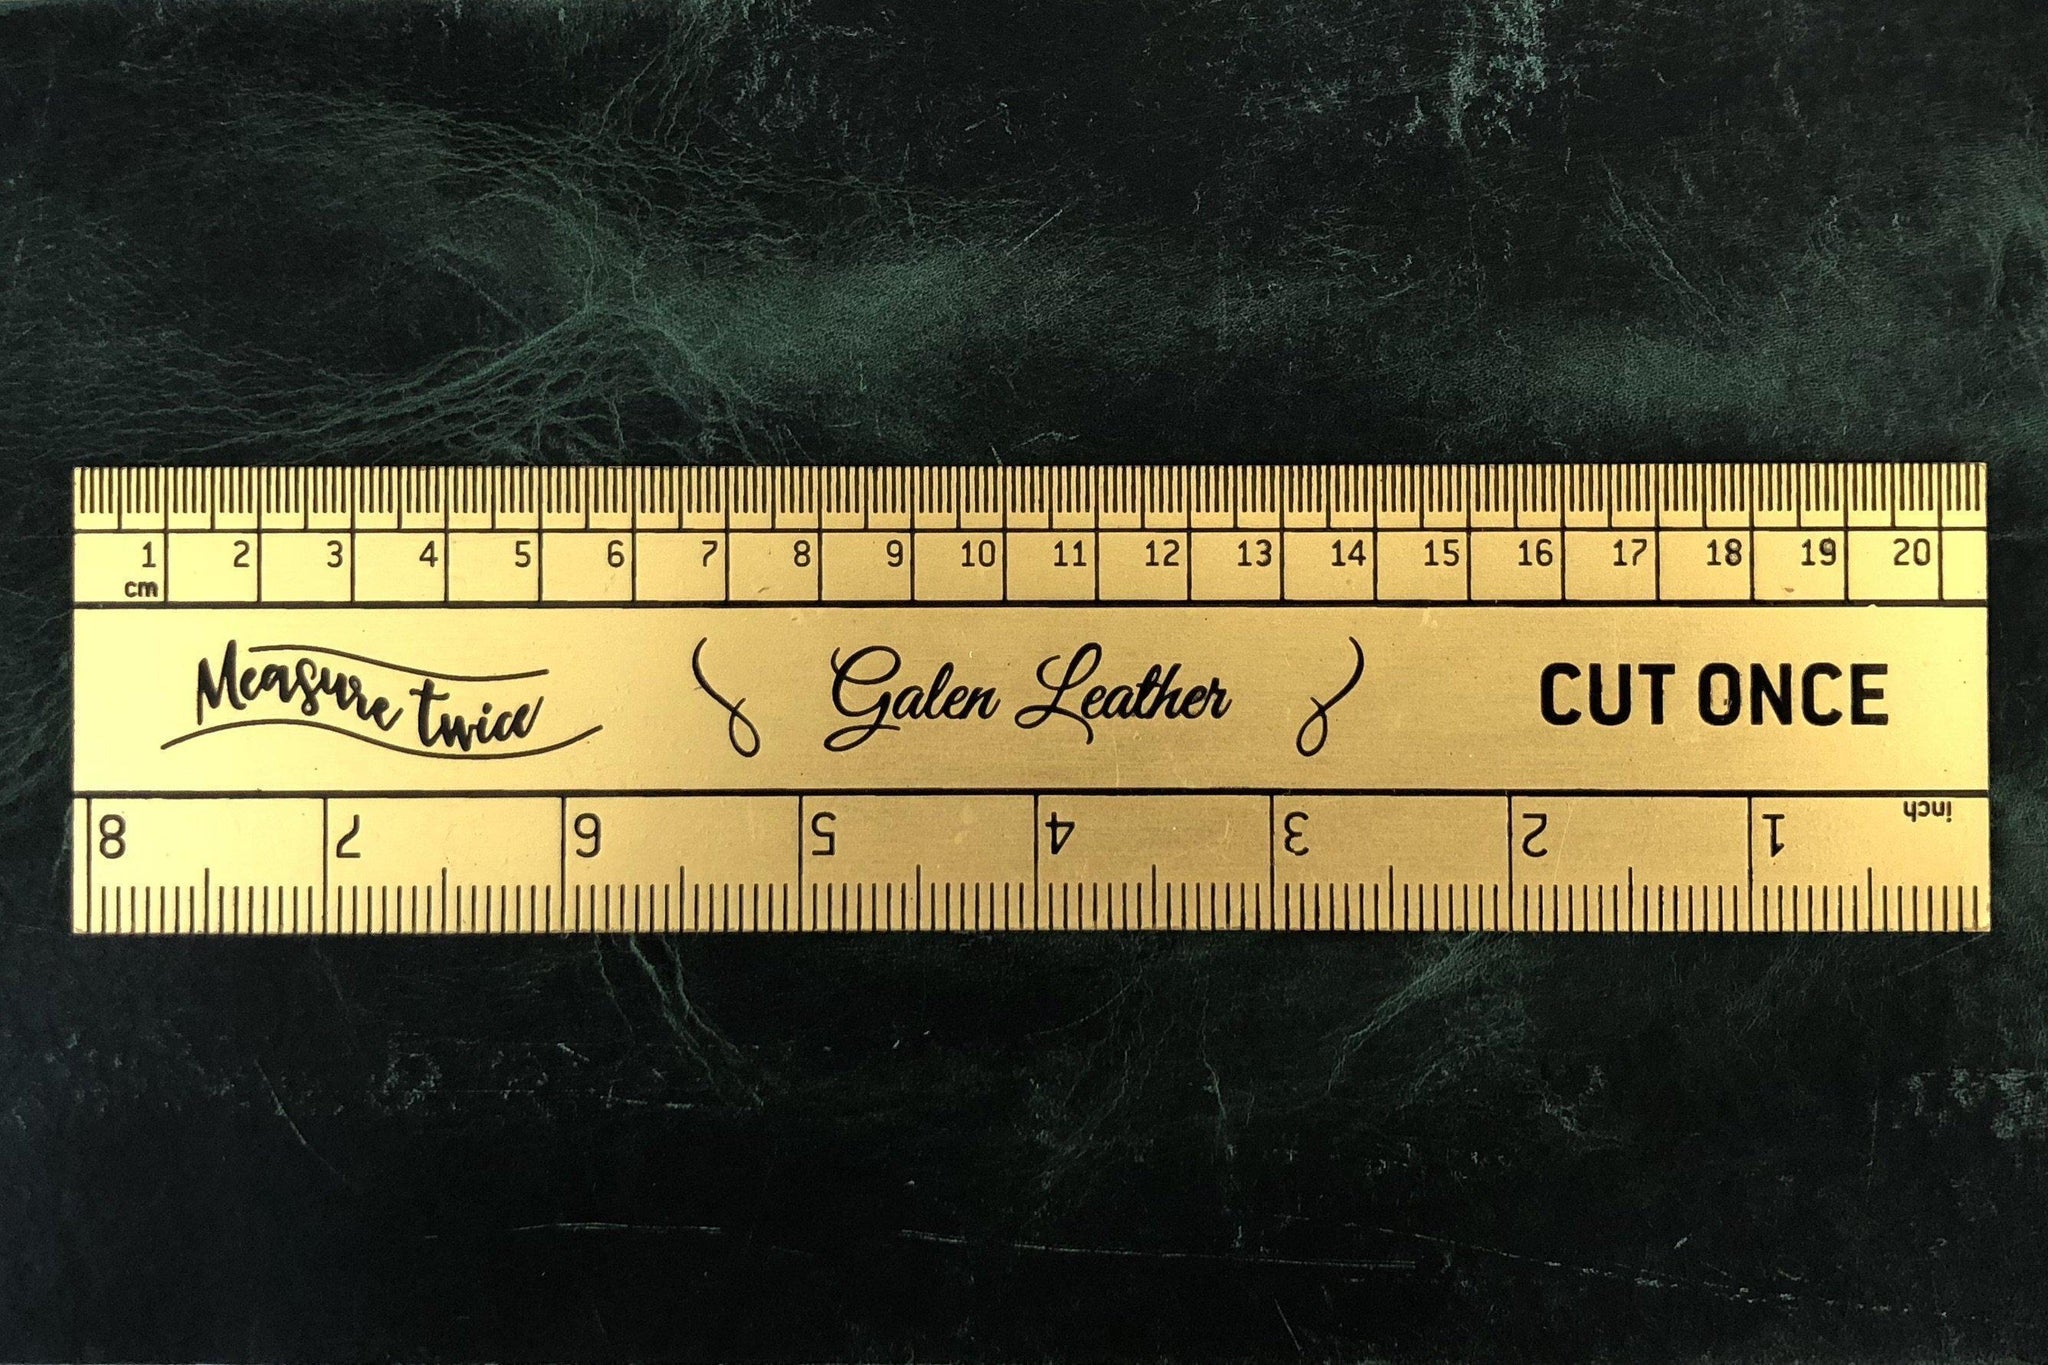 Great Old Handmade 24 Inch Double Sided Ruler with Brass Ends – critical  EYE Finds